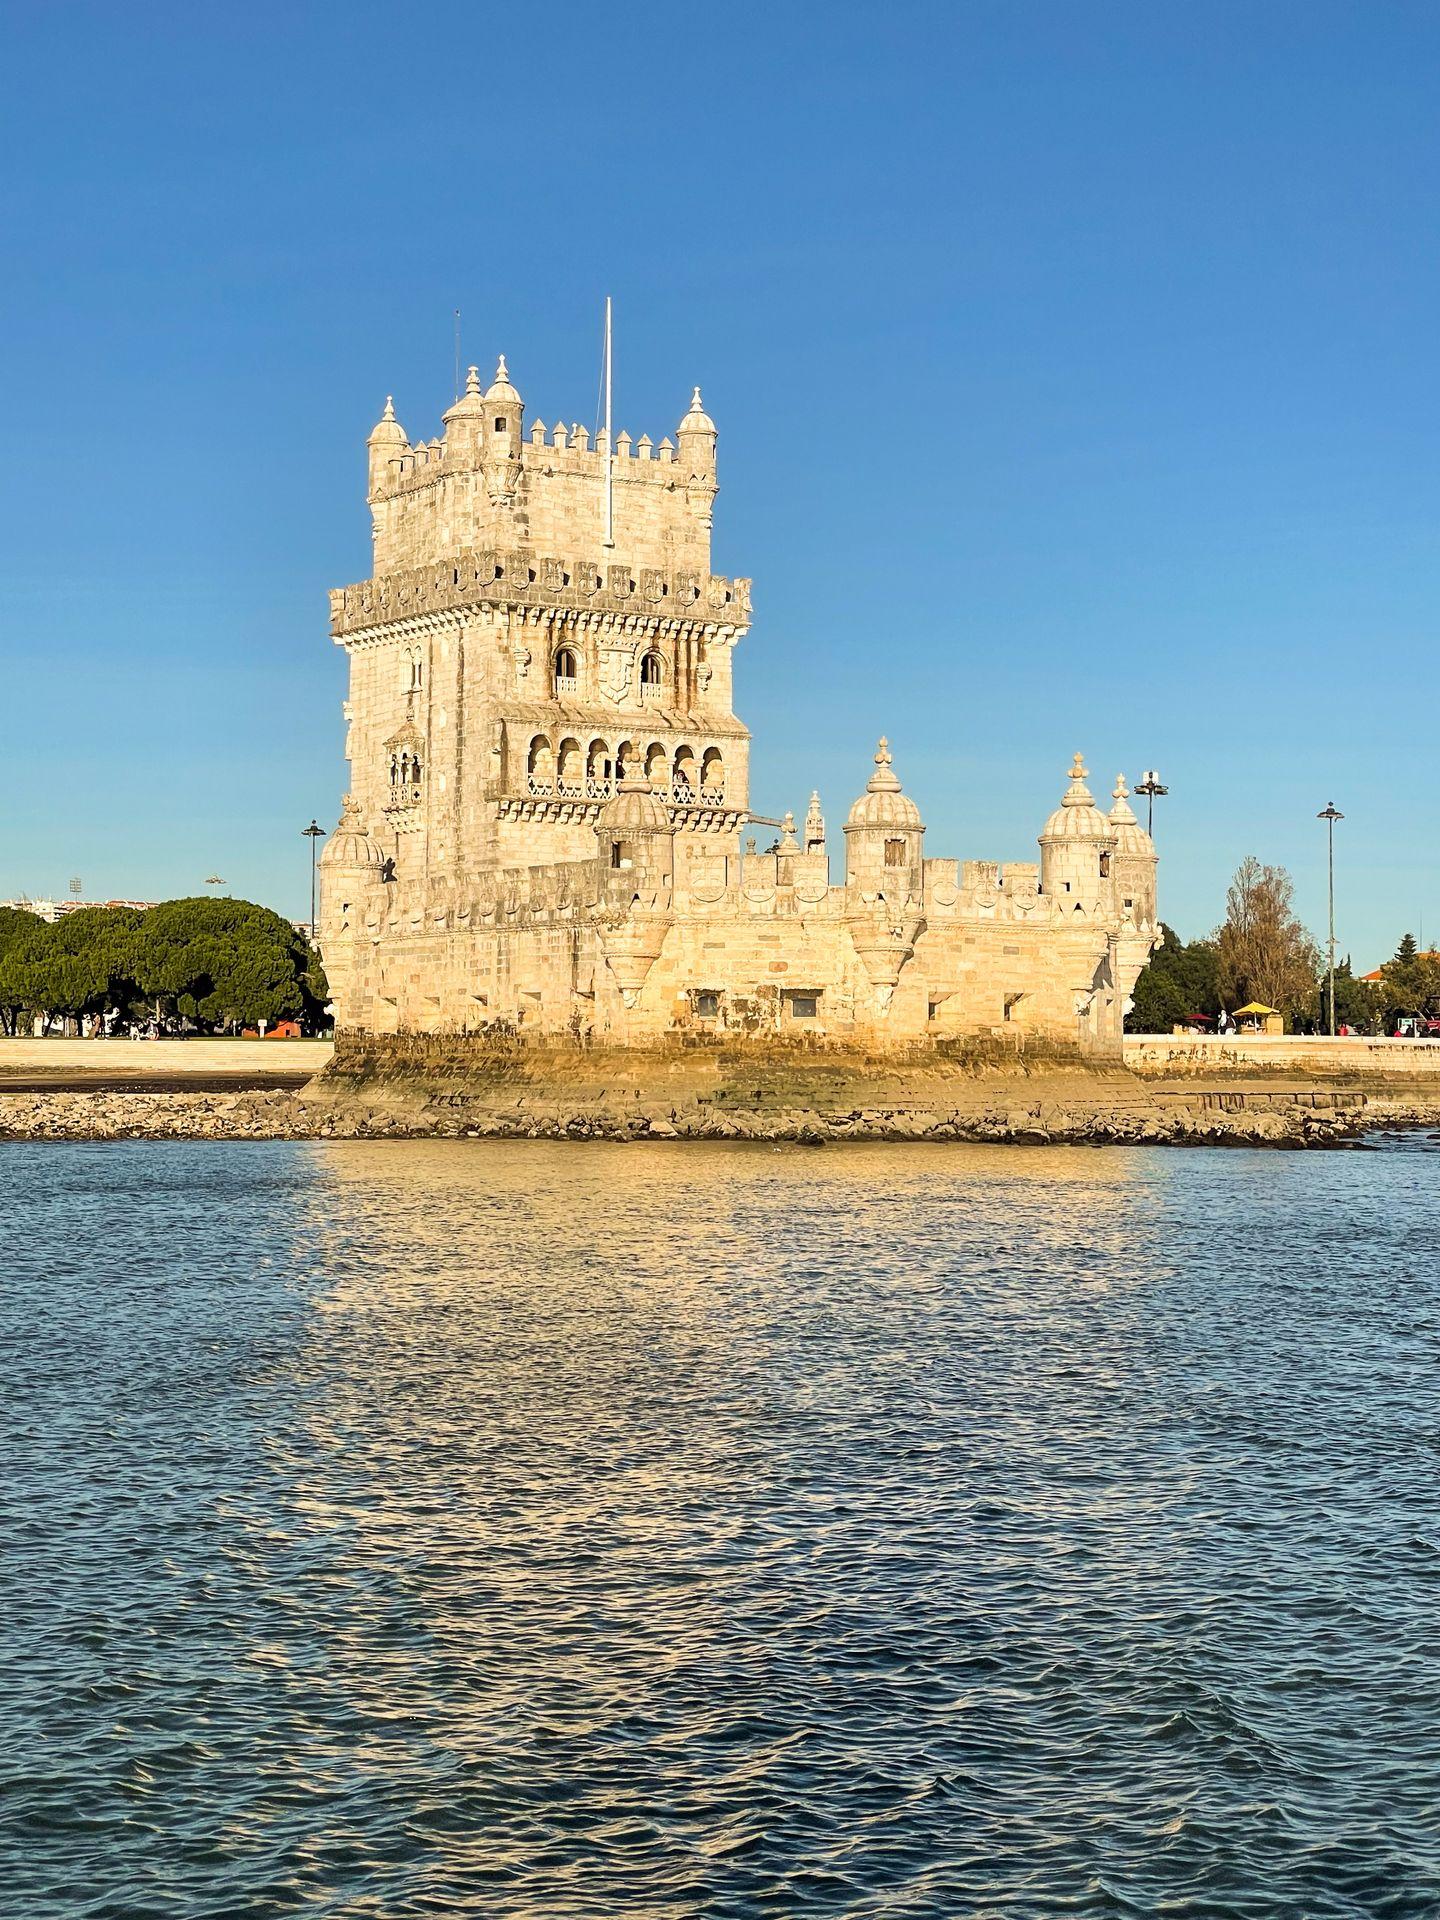 The Belém Tower seen from the water